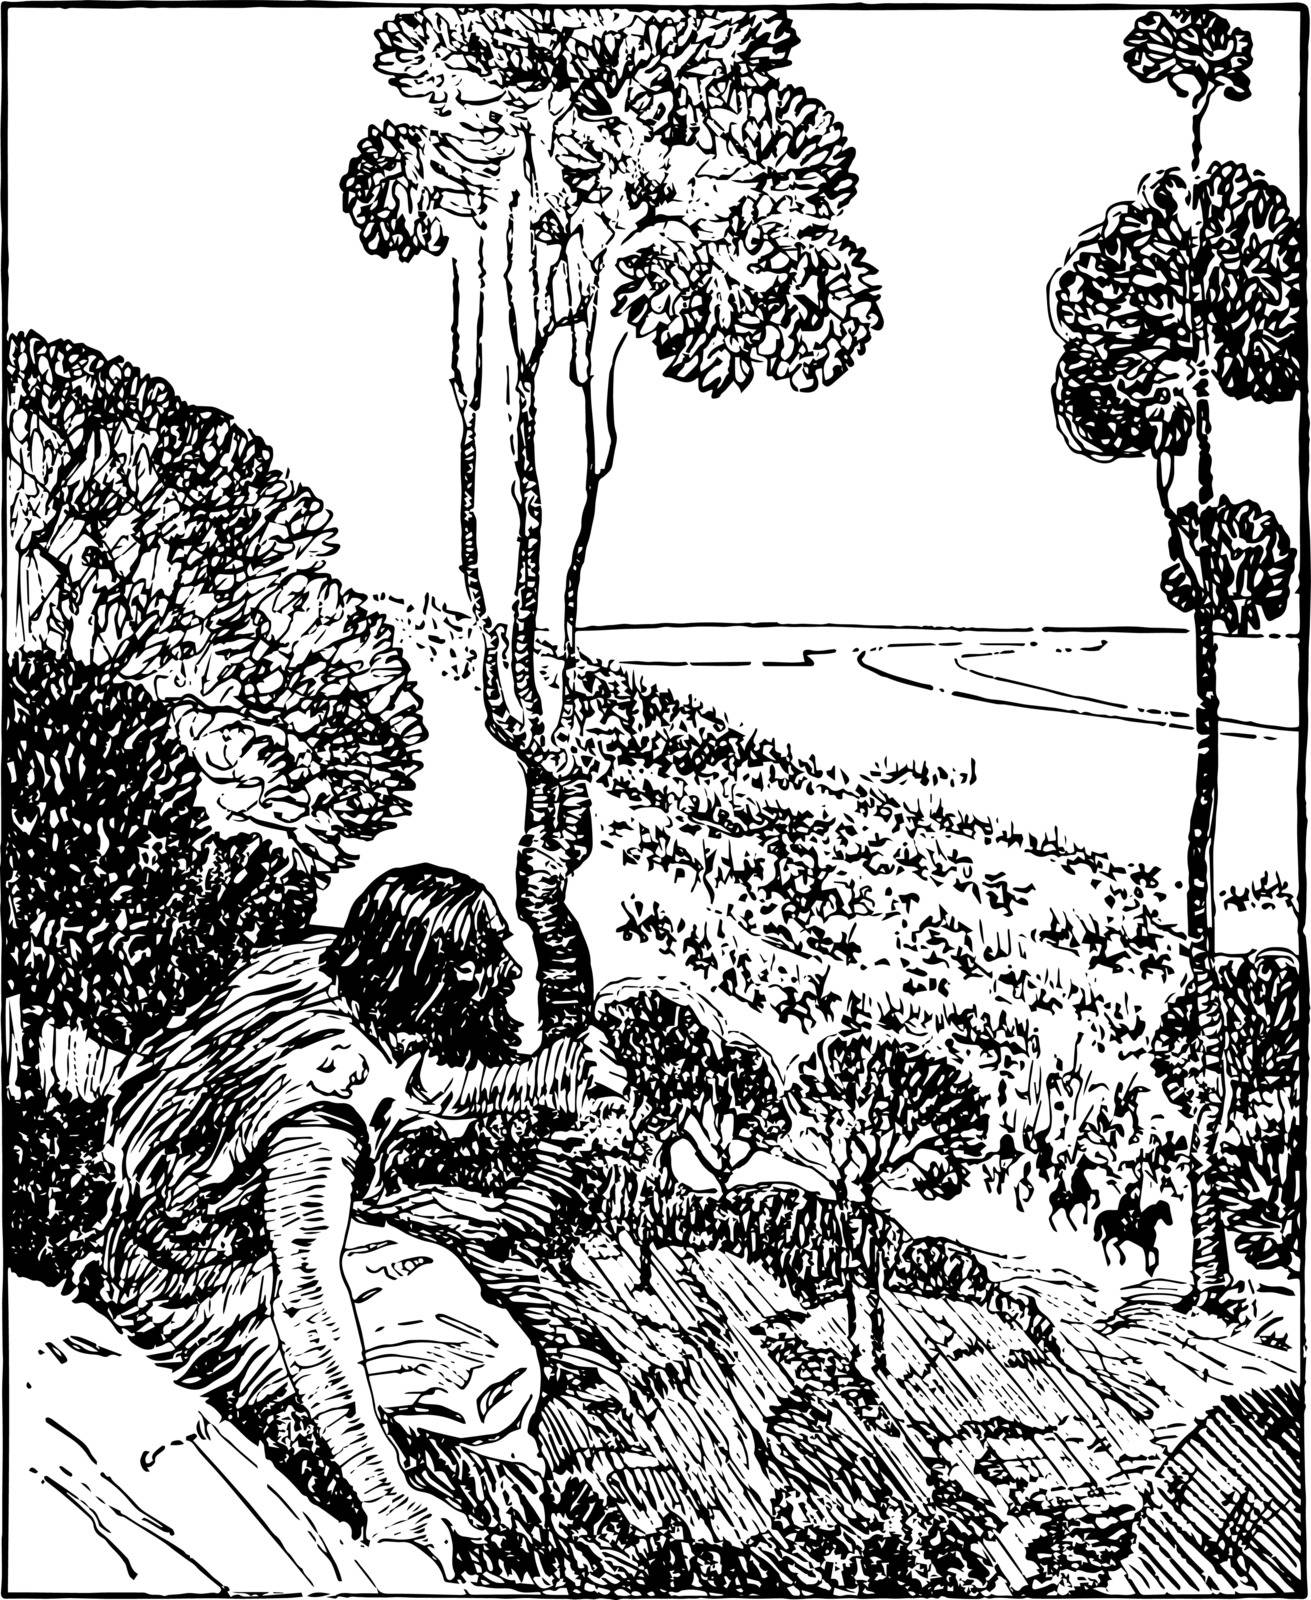 A person in the image is sitting at the base of the trees, and the battle is on the lower side, vintage line drawing or engraving illustration.